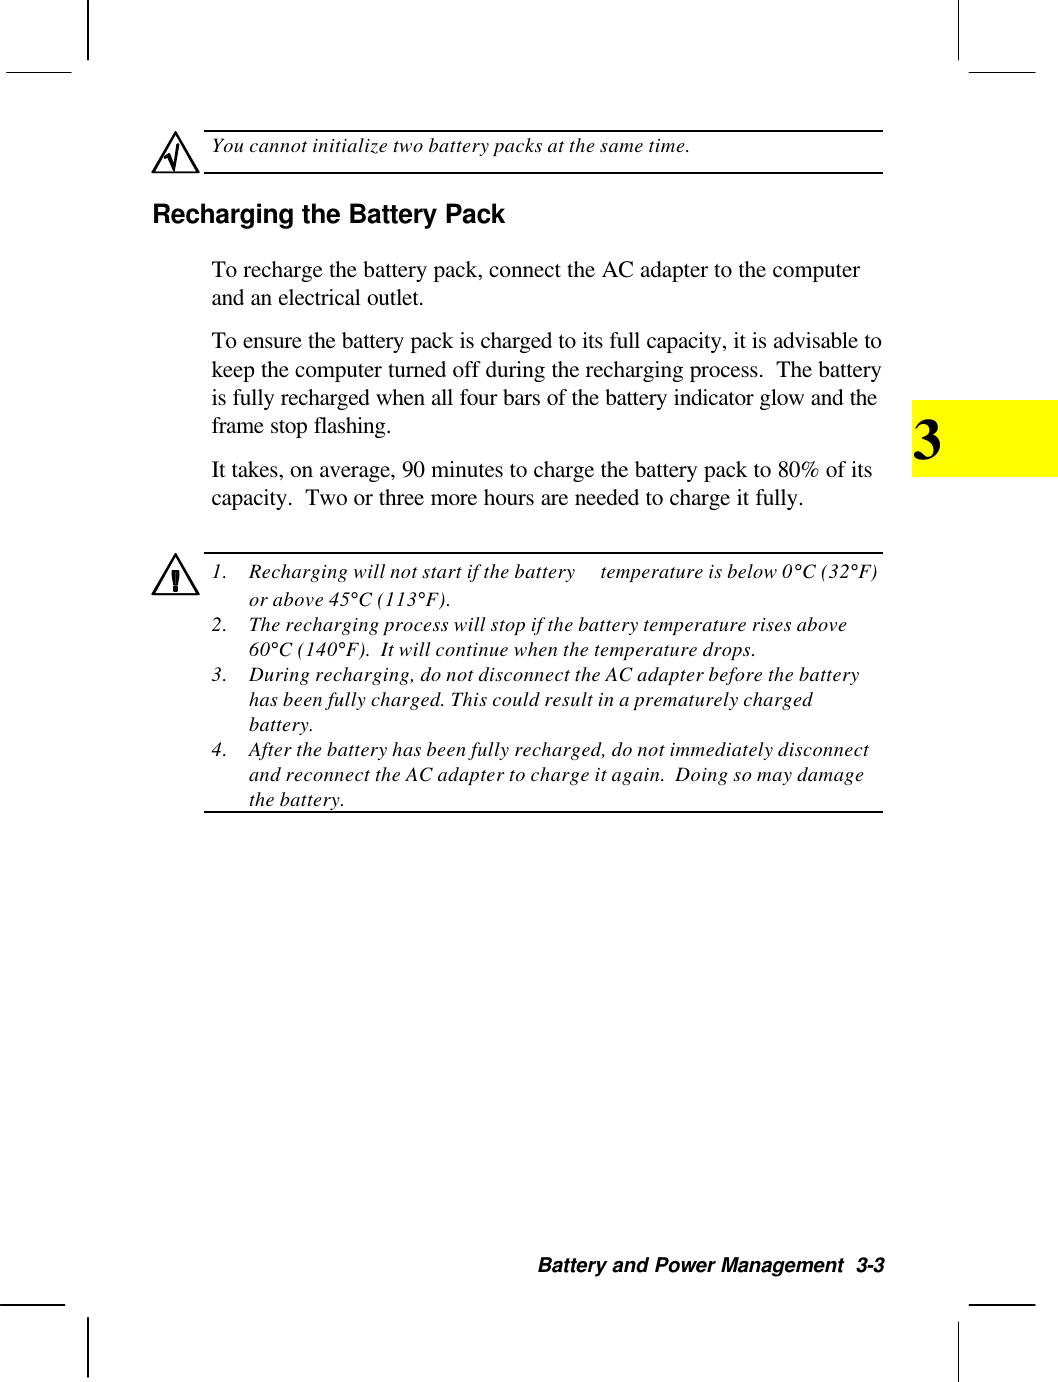 Battery and Power Management  3-33You cannot initialize two battery packs at the same time.Recharging the Battery PackTo recharge the battery pack, connect the AC adapter to the computerand an electrical outlet.To ensure the battery pack is charged to its full capacity, it is advisable tokeep the computer turned off during the recharging process.  The batteryis fully recharged when all four bars of the battery indicator glow and theframe stop flashing.It takes, on average, 90 minutes to charge the battery pack to 80% of itscapacity.  Two or three more hours are needed to charge it fully.1. Recharging will not start if the battery  temperature is below 0°C (32°F)or above 45°C (113°F).2. The recharging process will stop if the battery temperature rises above60°C (140°F).  It will continue when the temperature drops.3. During recharging, do not disconnect the AC adapter before the batteryhas been fully charged. This could result in a prematurely chargedbattery.4. After the battery has been fully recharged, do not immediately disconnectand reconnect the AC adapter to charge it again.  Doing so may damagethe battery.